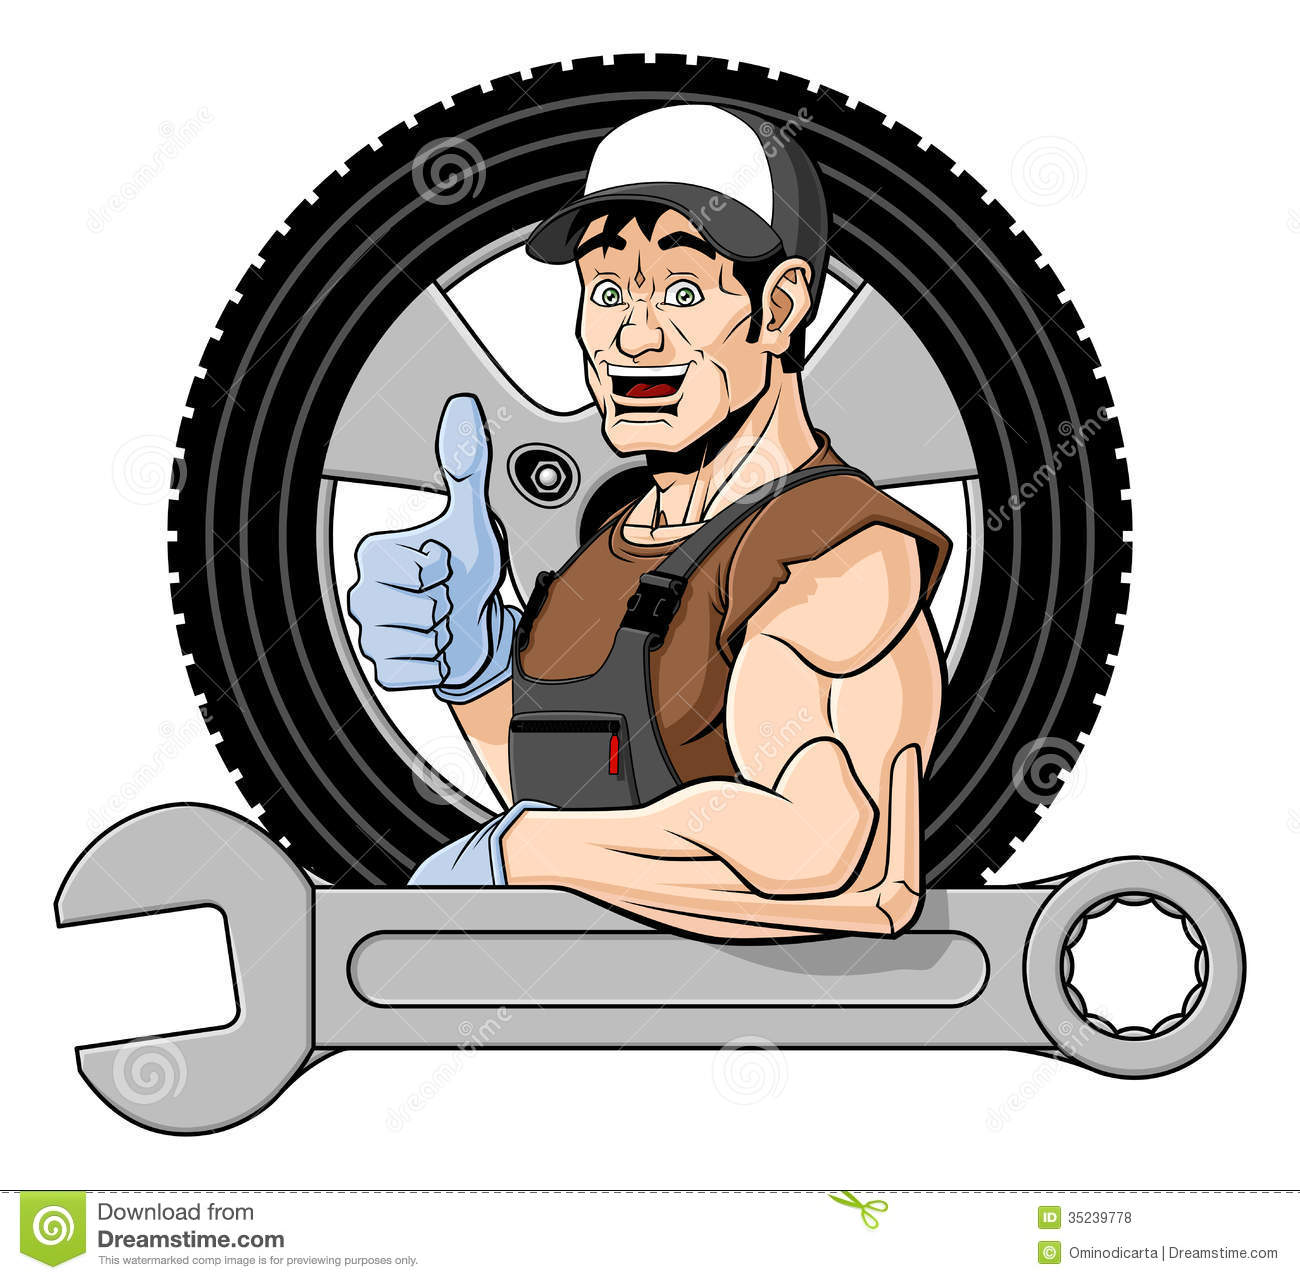 Illustration Of A Smiling Tire Specialist  He Is Leaning On A Big